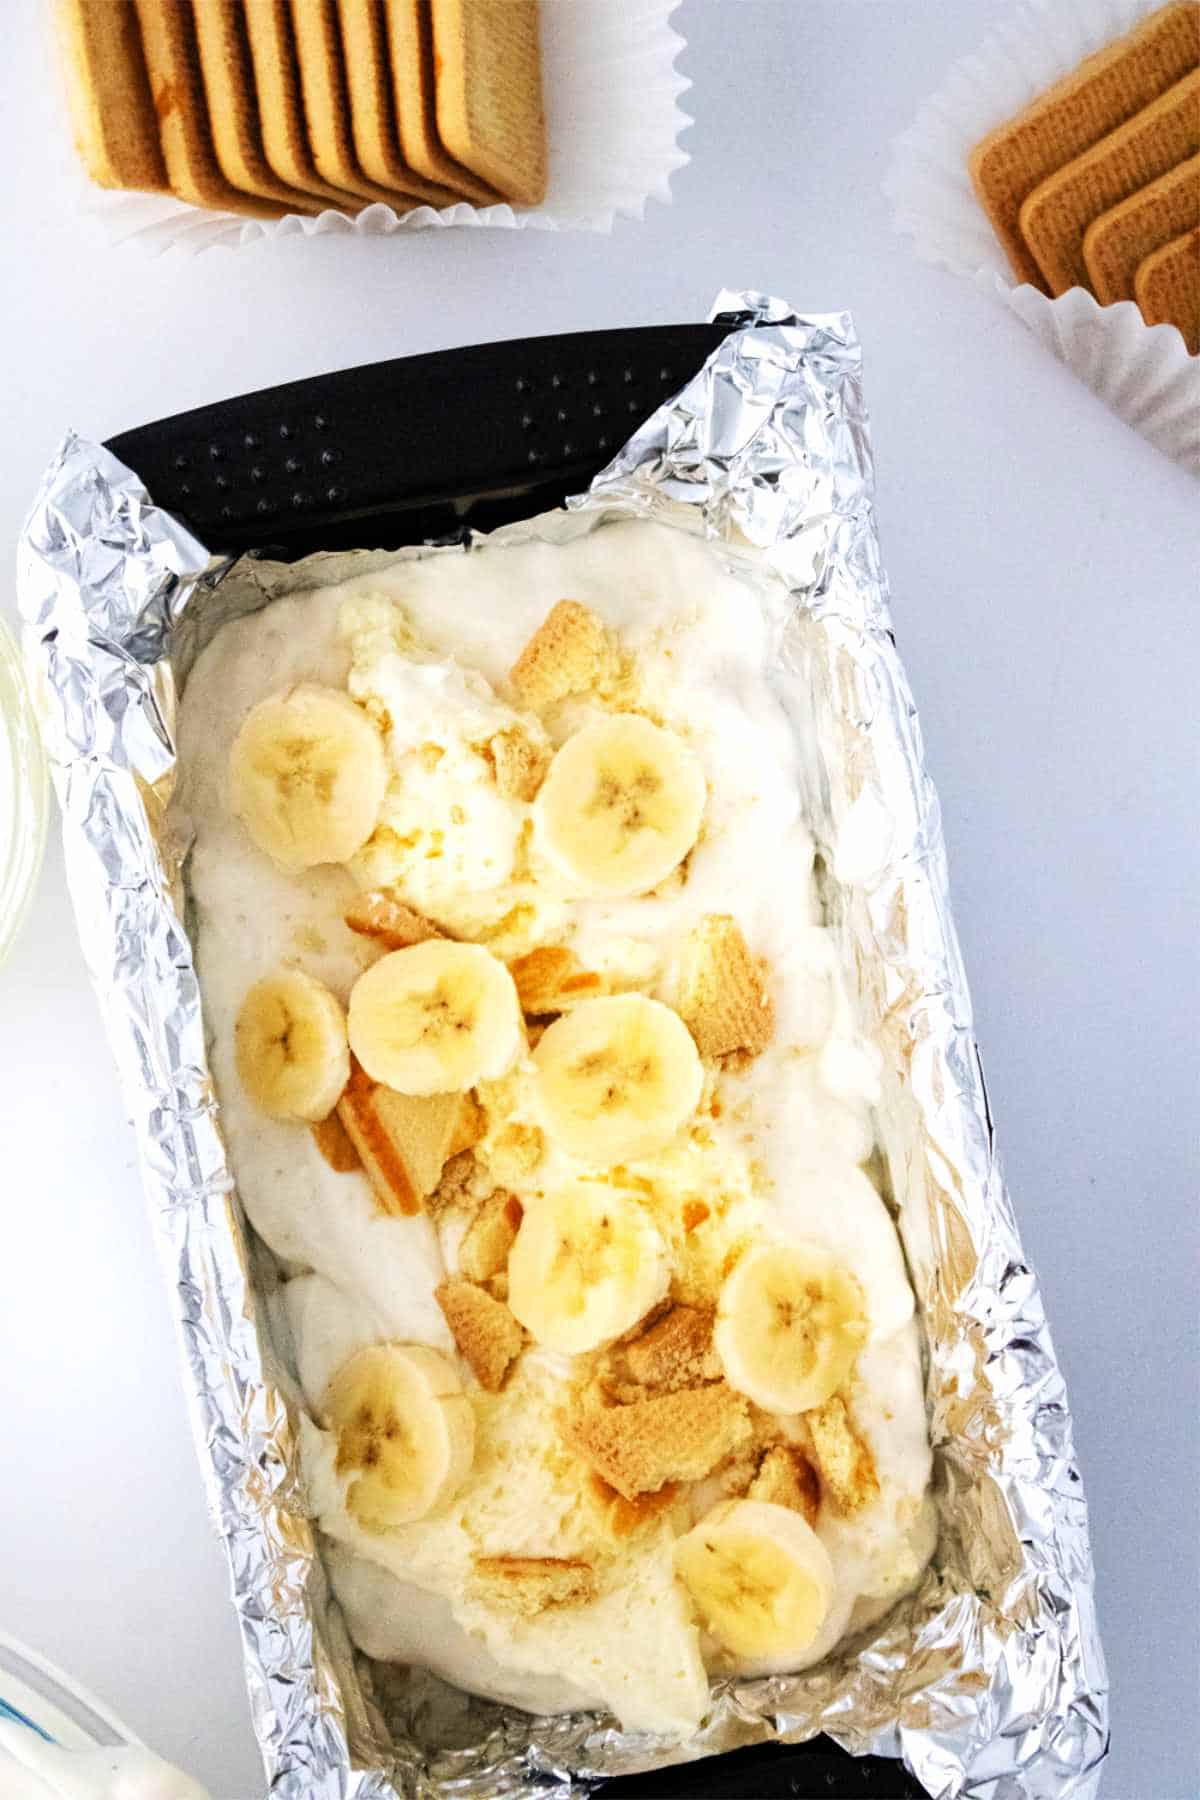 ice cream layers with sliced bananas and crushed sugar cookies.